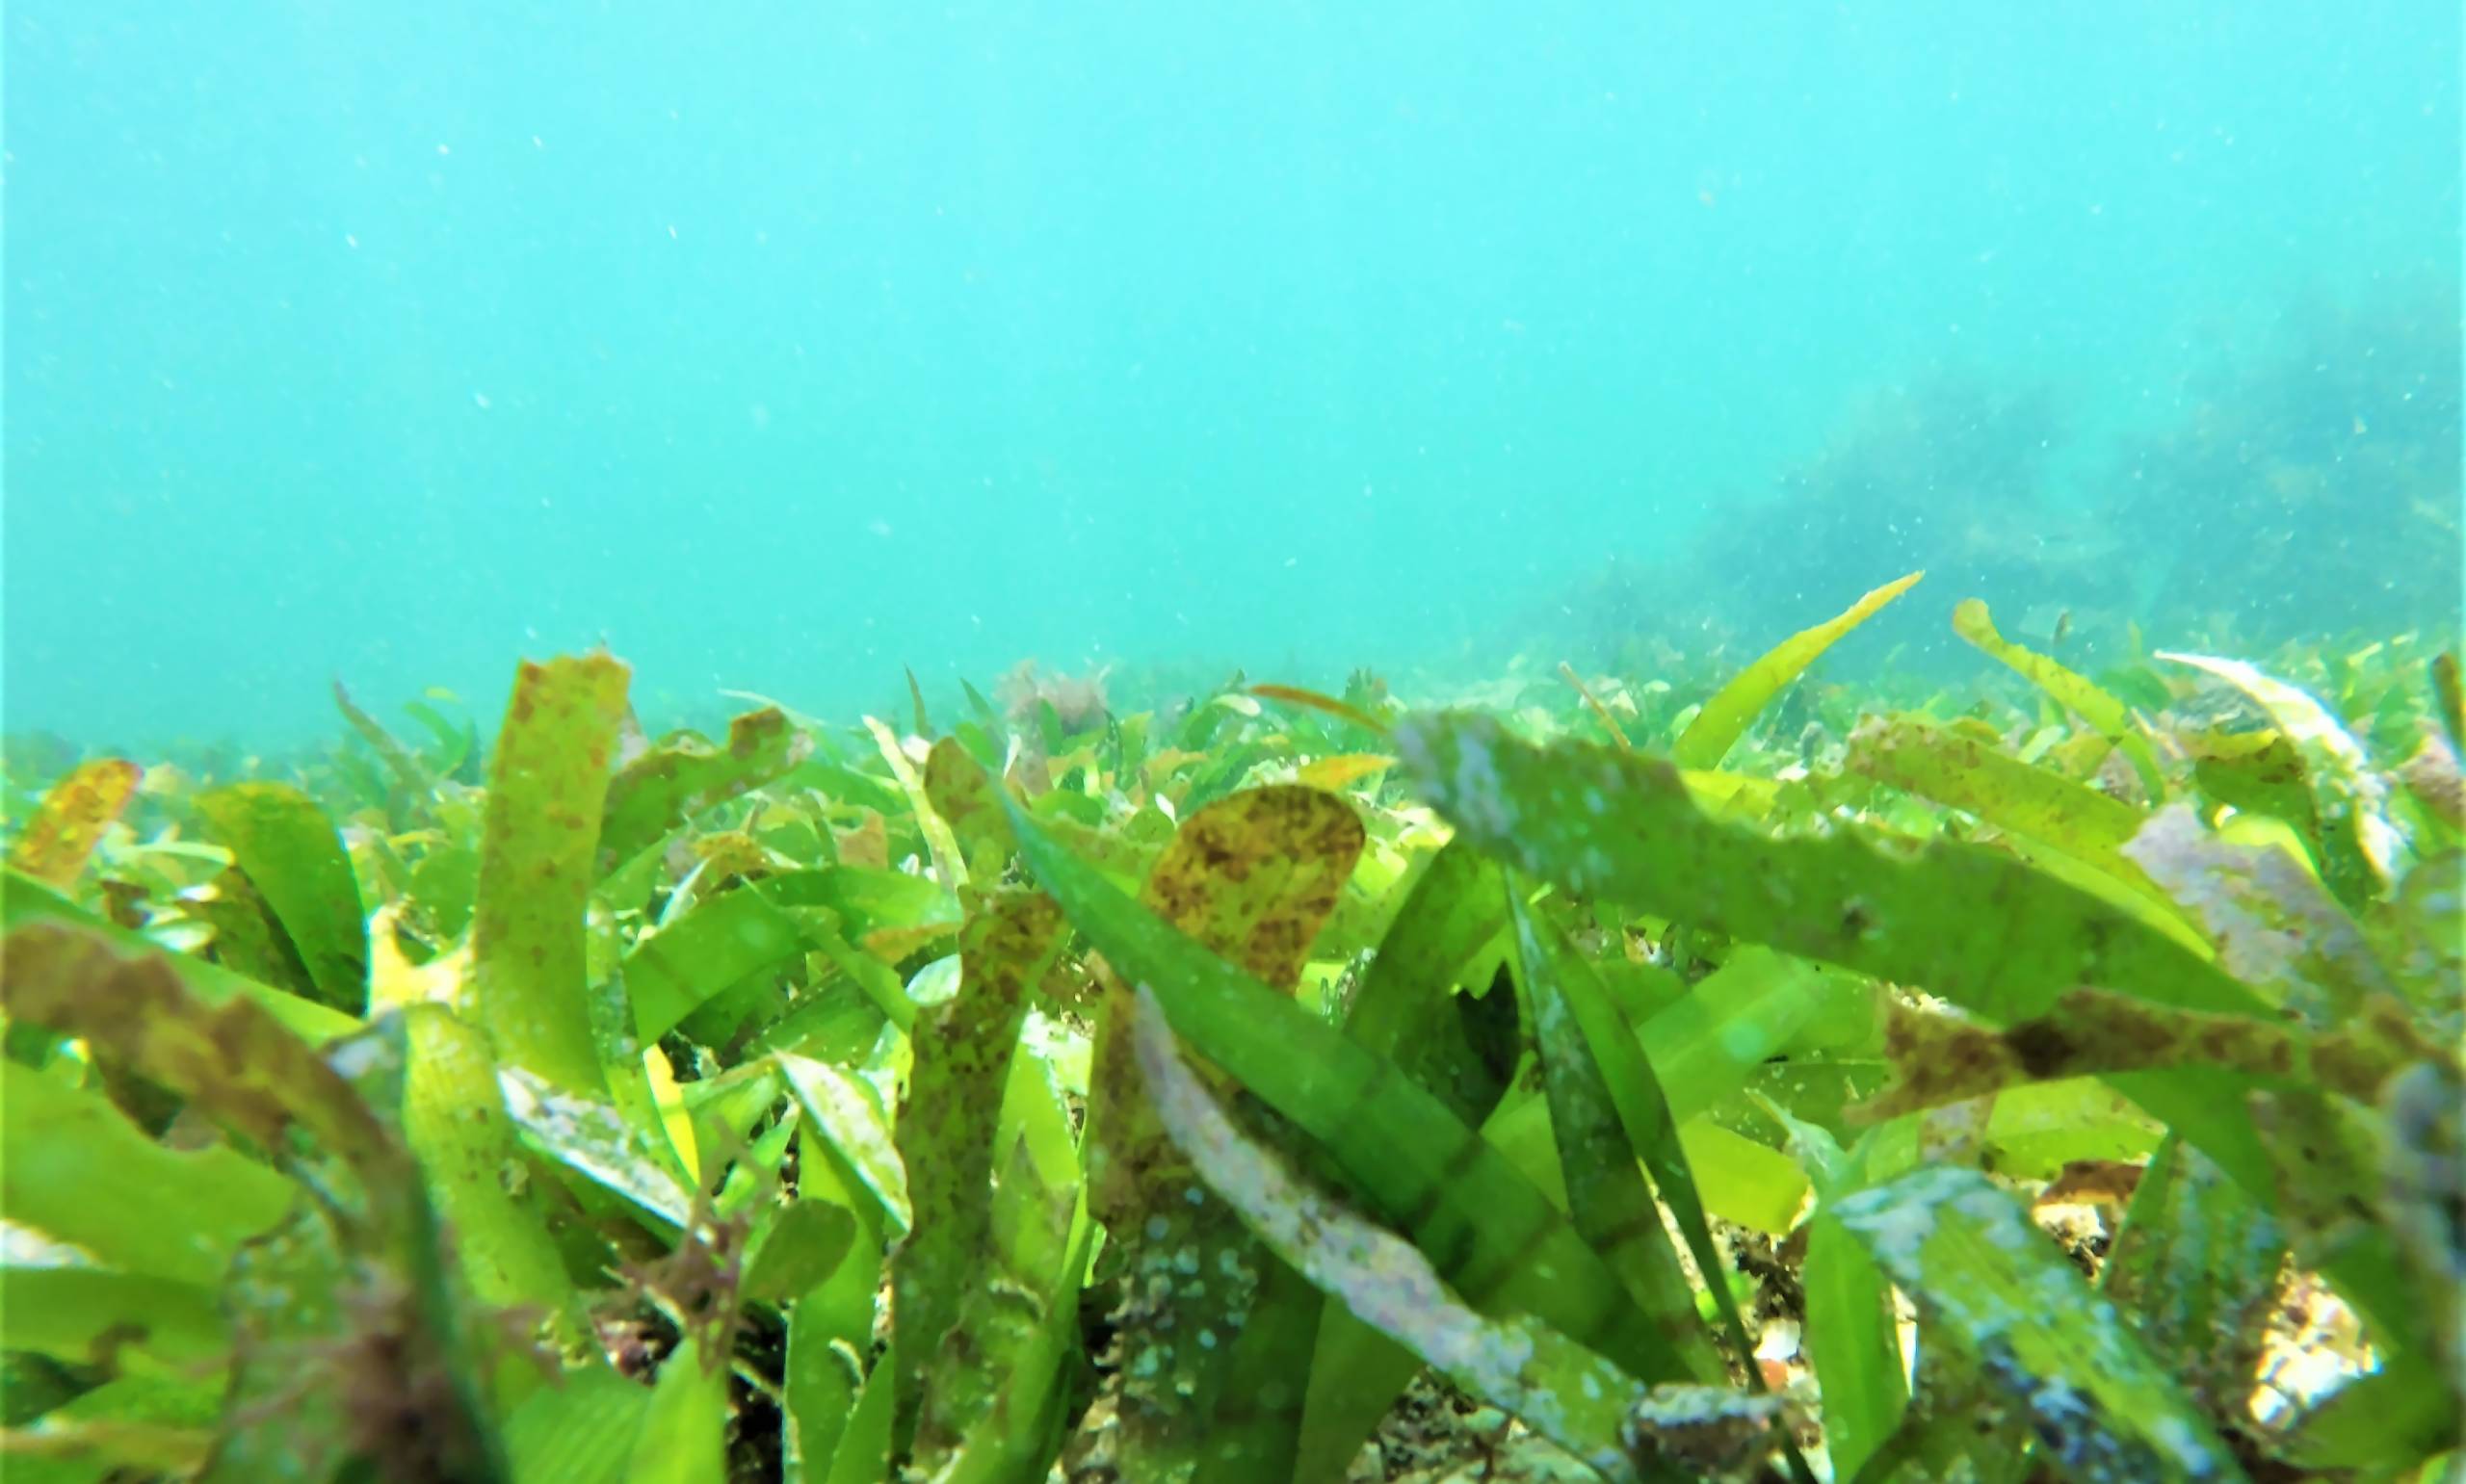 Encountering a dense patch of seagrass during an underwater survey